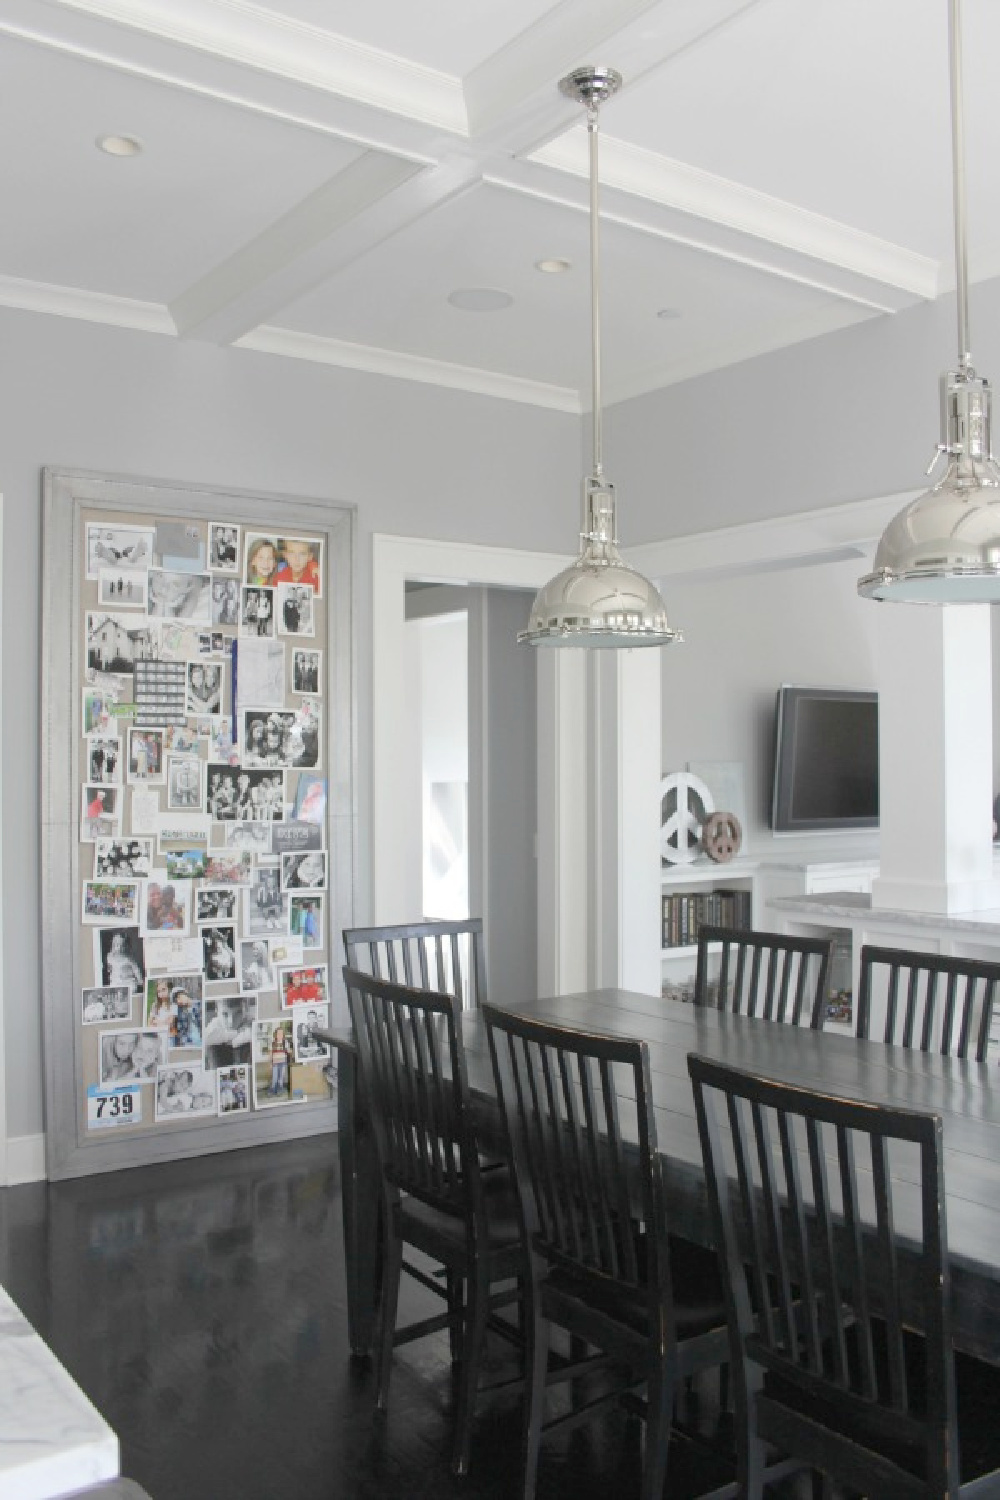 Breakfast room with harvest table and Stonington Gray walls in a modern farmhouse - Hello Lovely Studio.